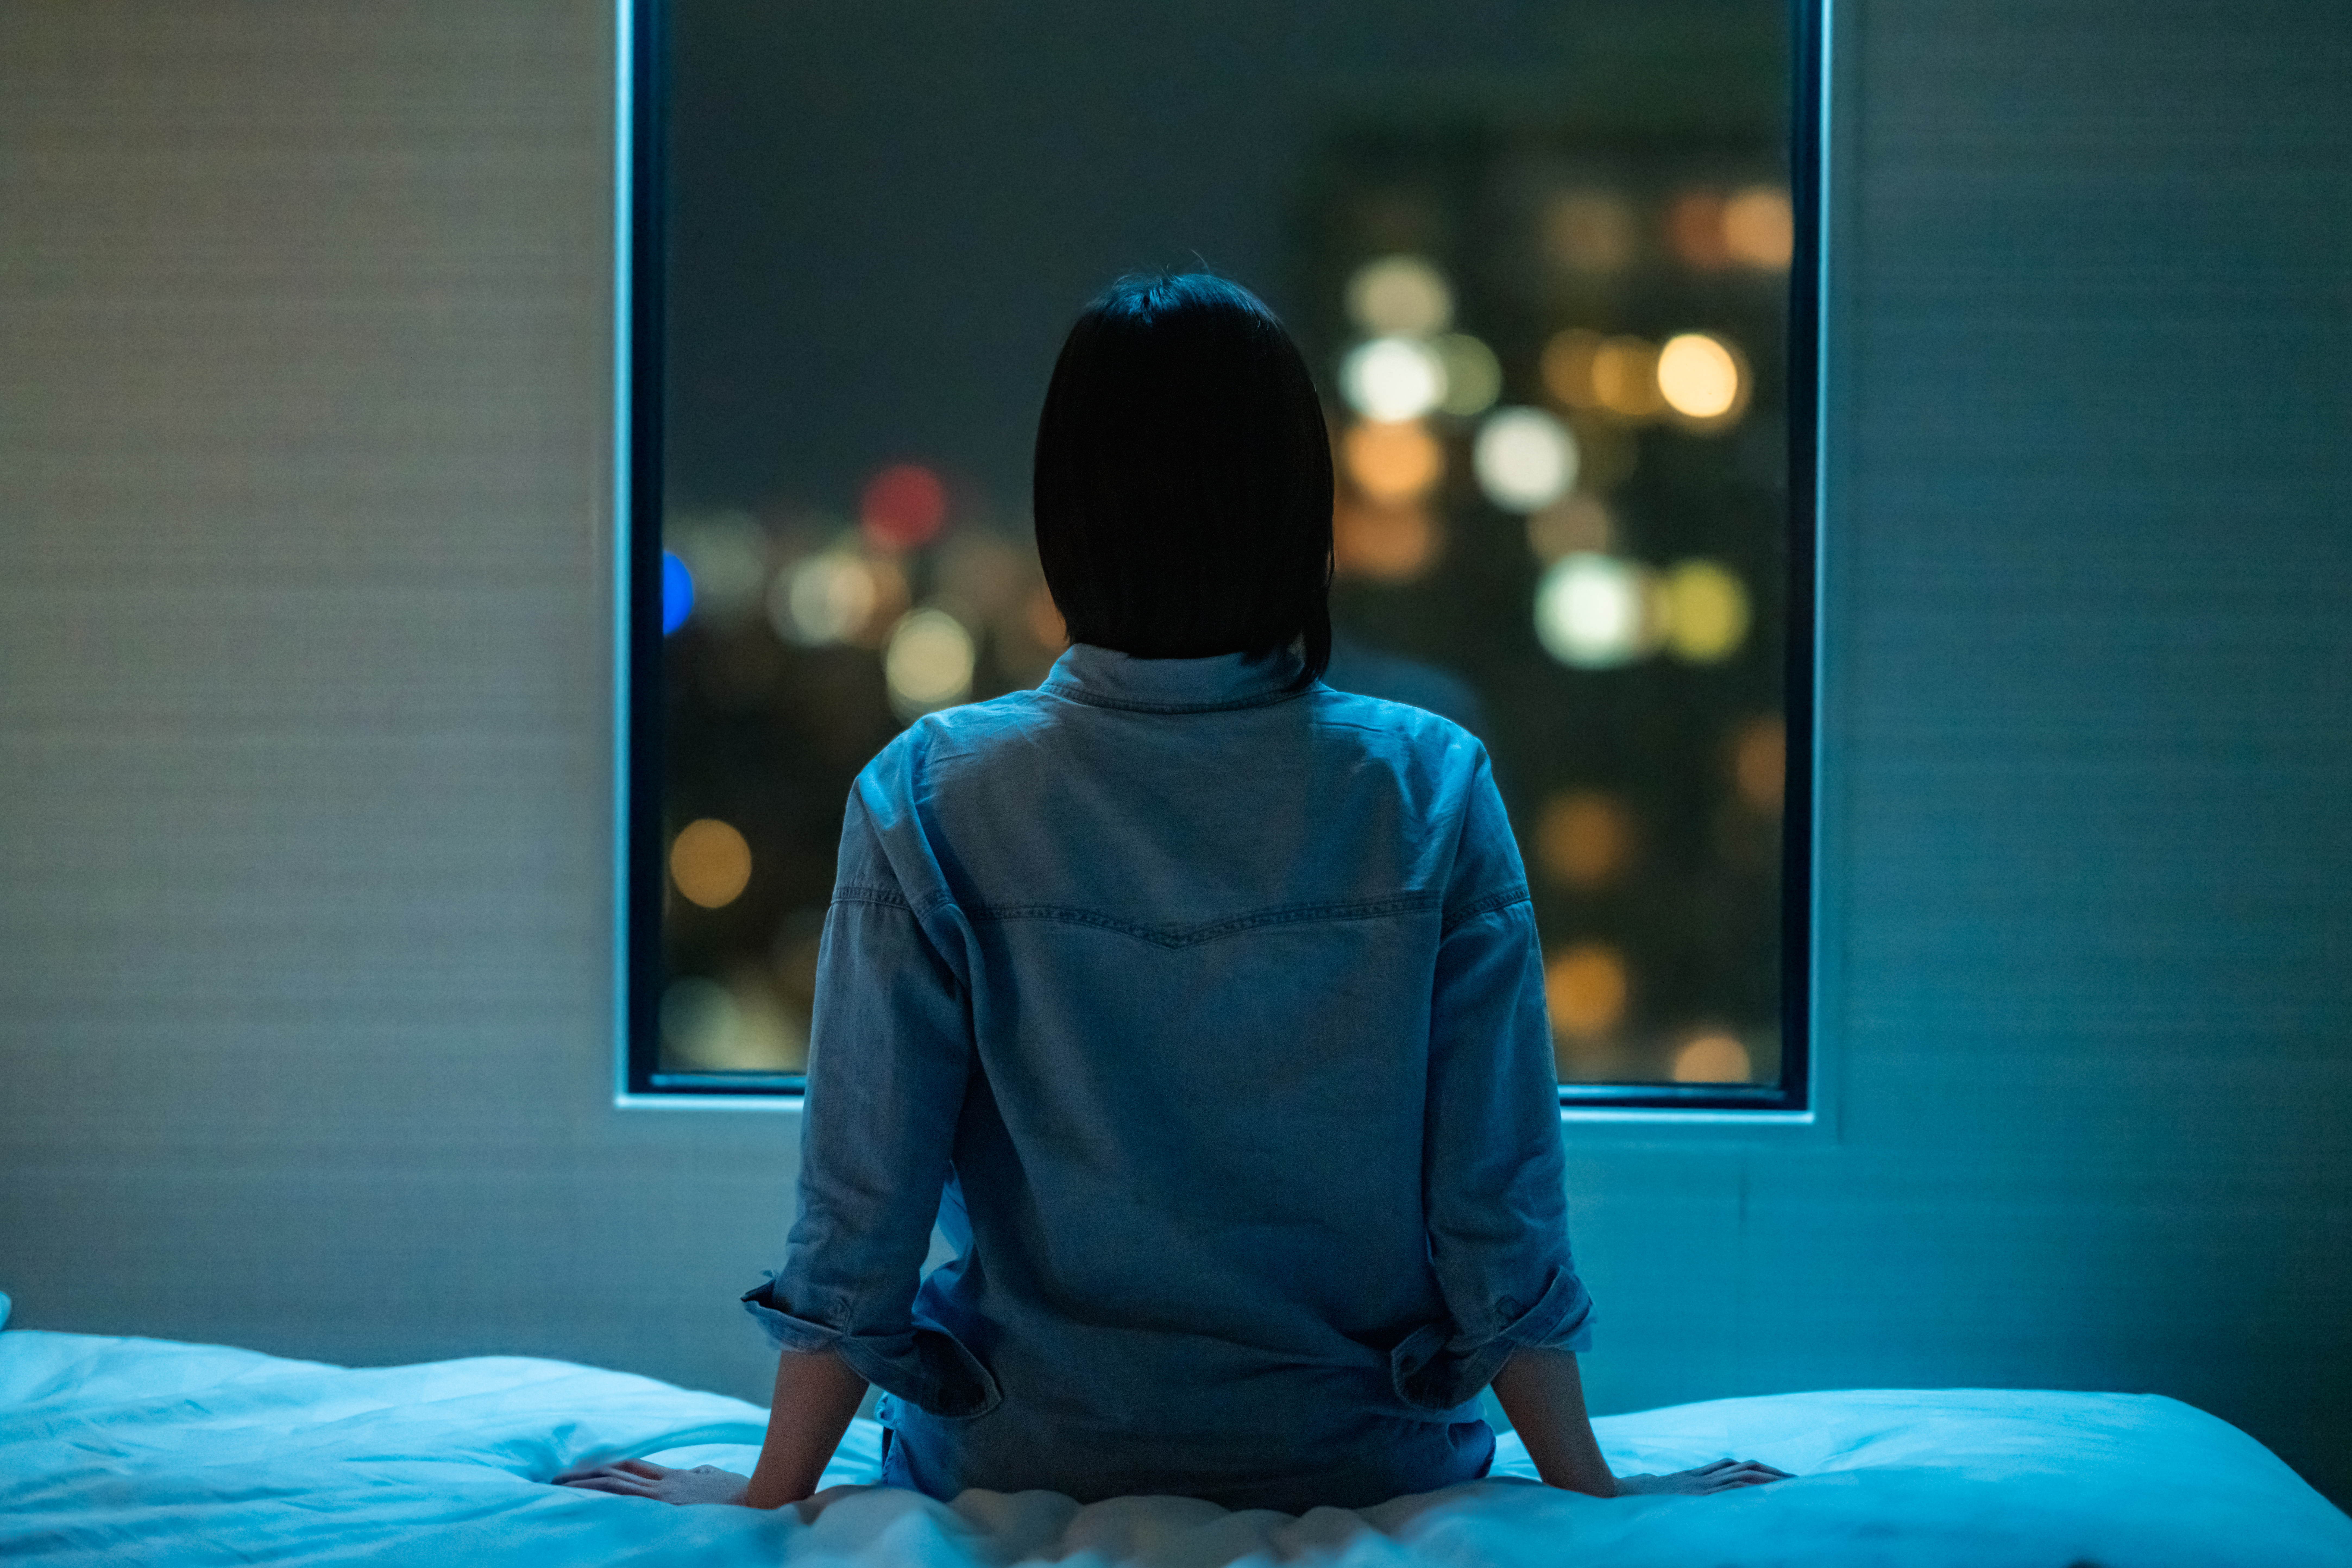 Rear view of woman sitting alone on bed in room and looking through window at night | Source: Getty Images